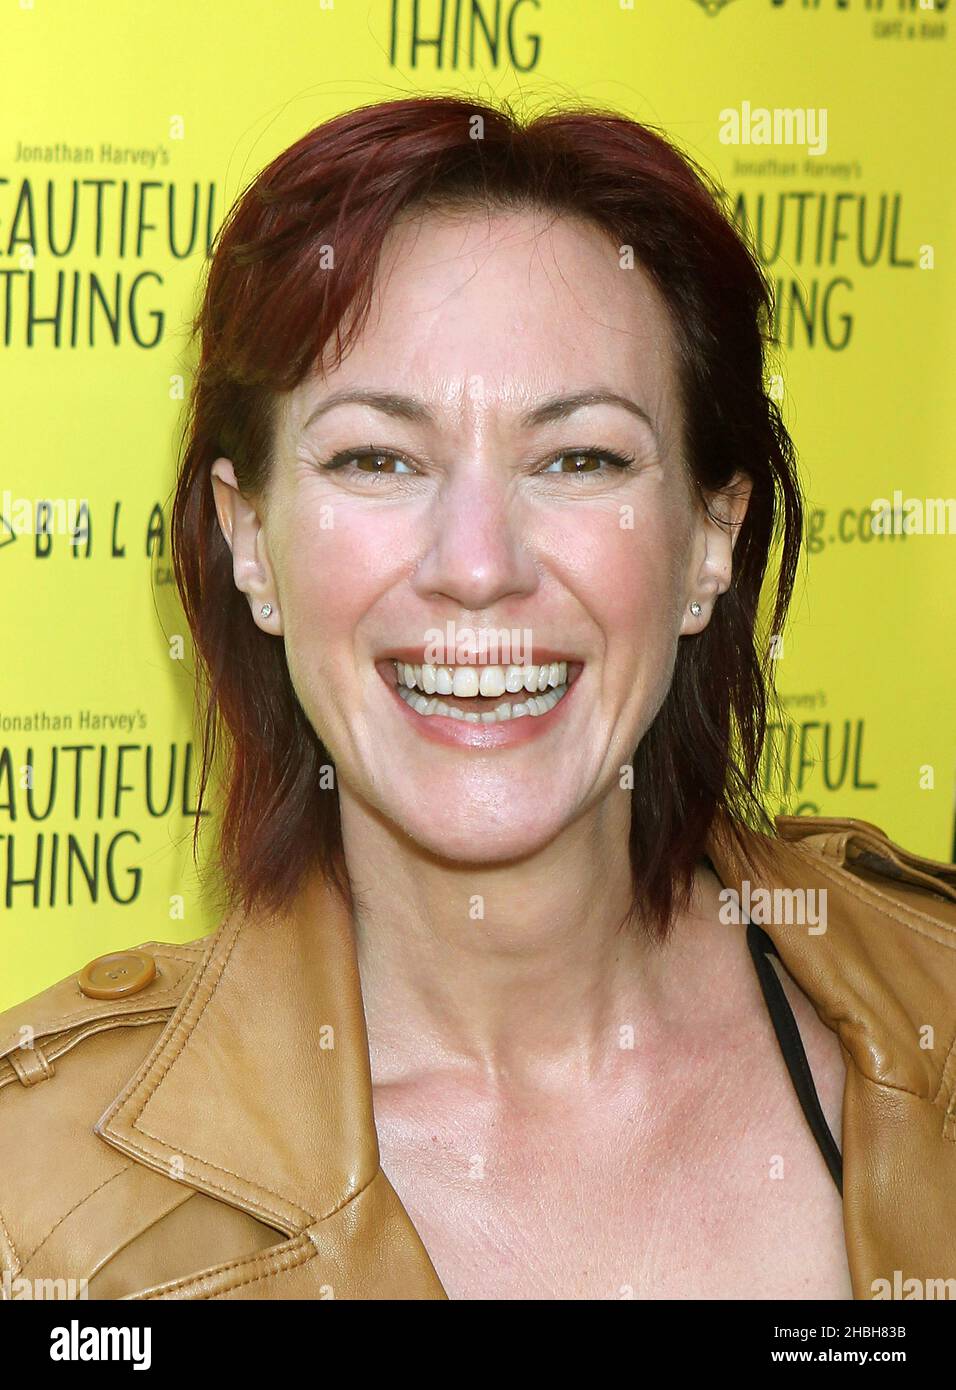 Tanya Franks attending the Beautiful Thing Press Night at the Arts Club Arrivals in London. Stock Photo